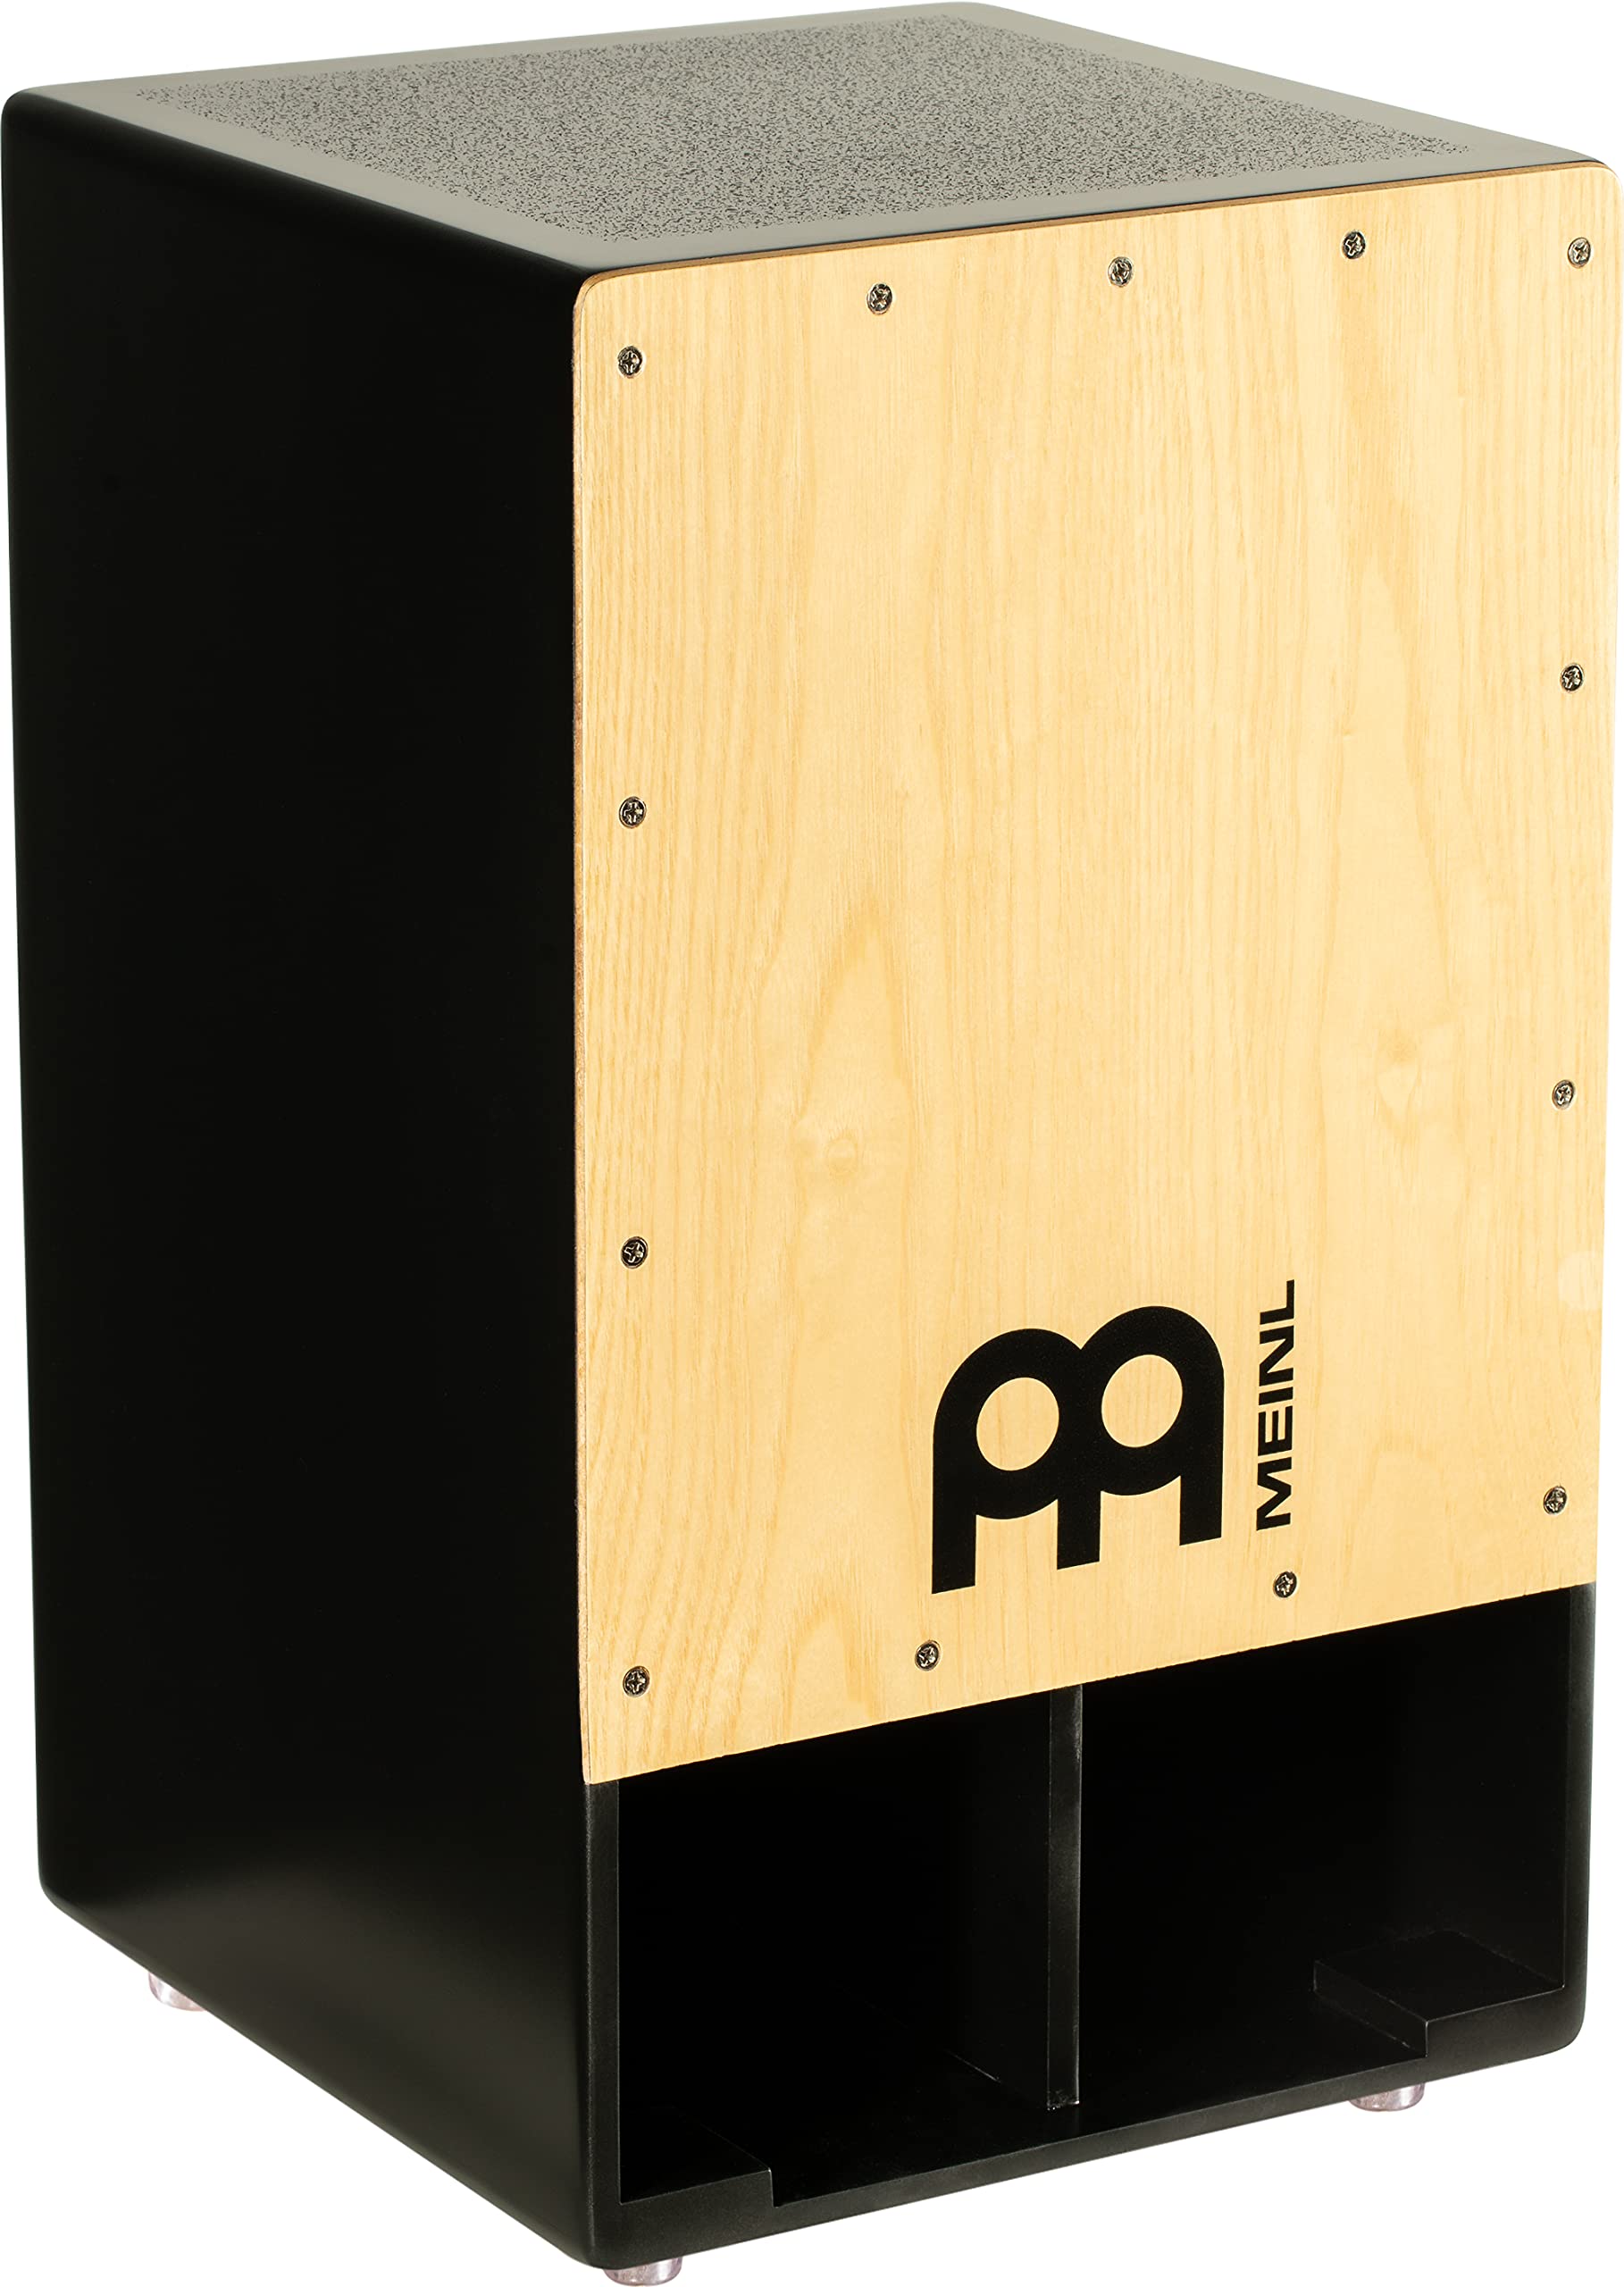 Meinl Percussion Meinl Subwoofer Bass cajon Box Drum with Internal Snares - NOT MADE IN cHINA - American White Ash Playing Surface, 2-YEAR WARRAN